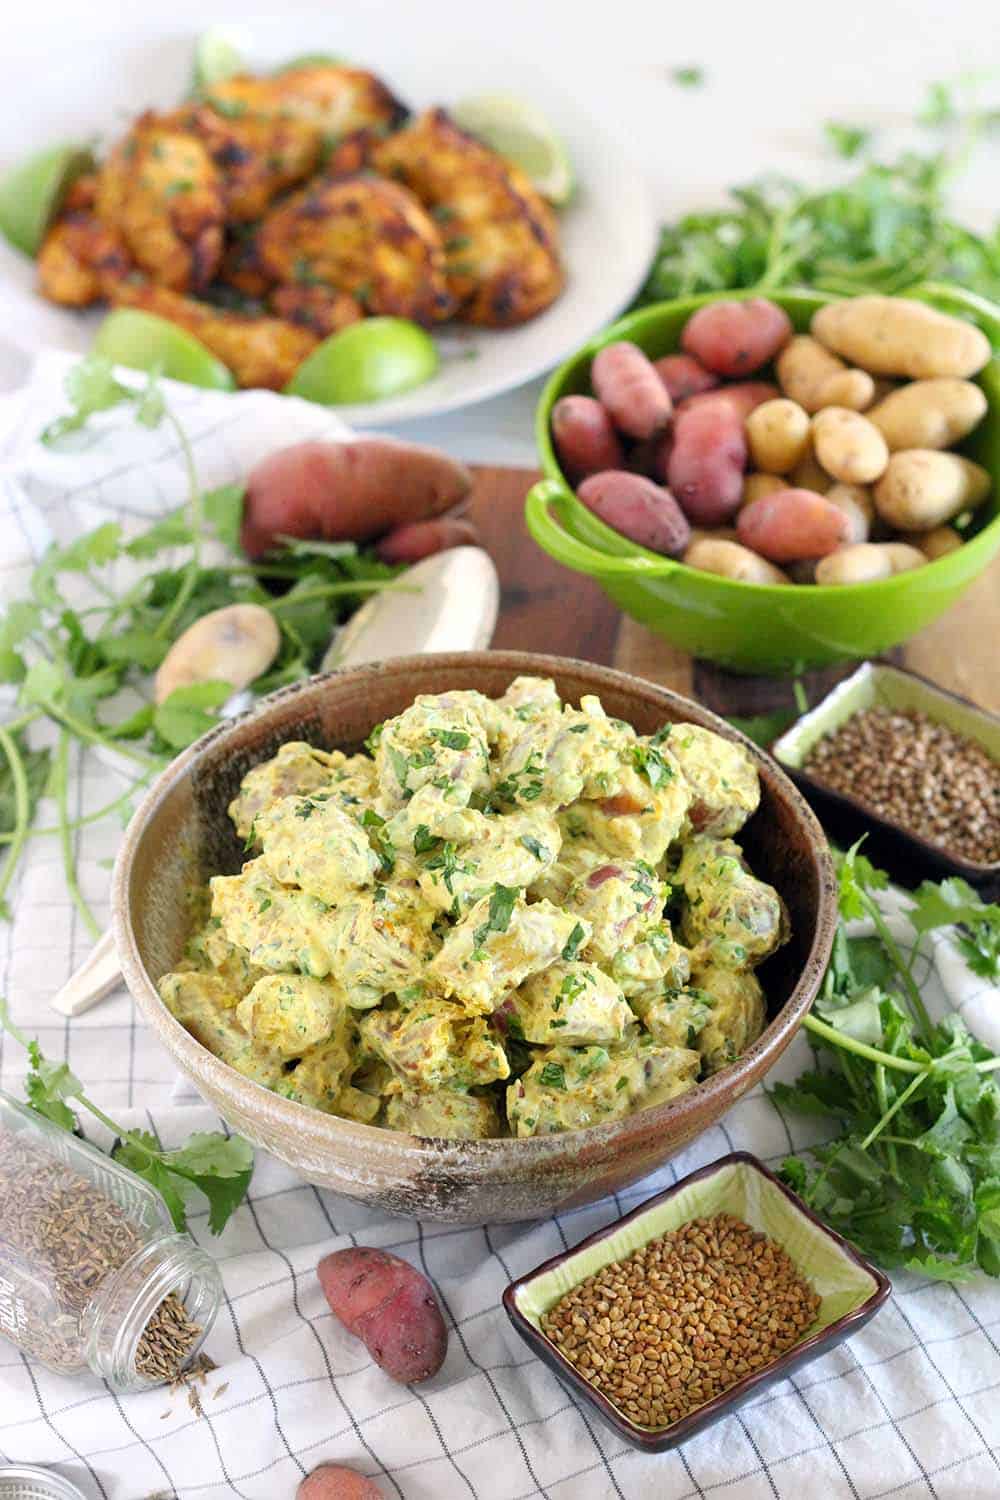 This Nepalese Potato Salad, or Chukauni, is a yogurt-based potato salad. It's gluten-free, healthy, and creamy, and it's packed full of delicious spices such as fenugreek, turmeric, cumin, cilantro, and cayenne. From Raghavan Iyer's Smashed, Mashed, Boiled, and Baked cookbook.